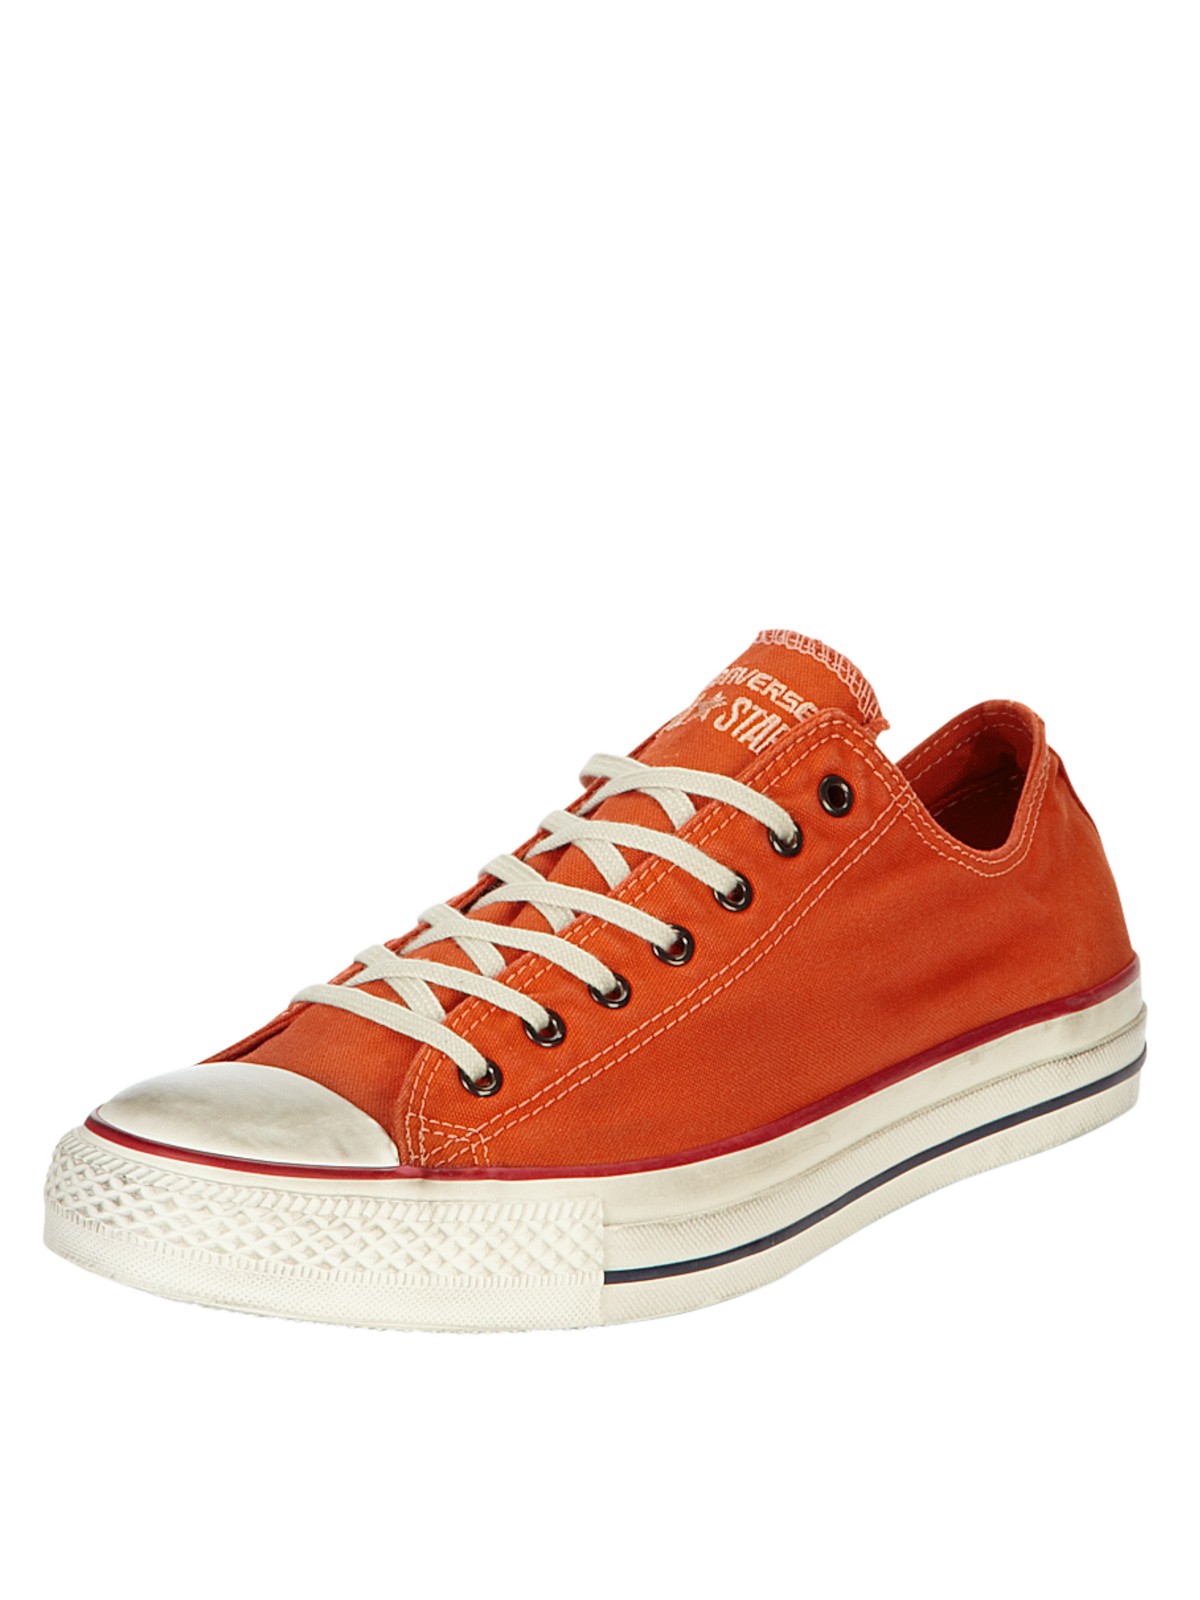 Converse Chuck Taylor All Star Mens Ox Textile In Orange For Men Lyst 9664